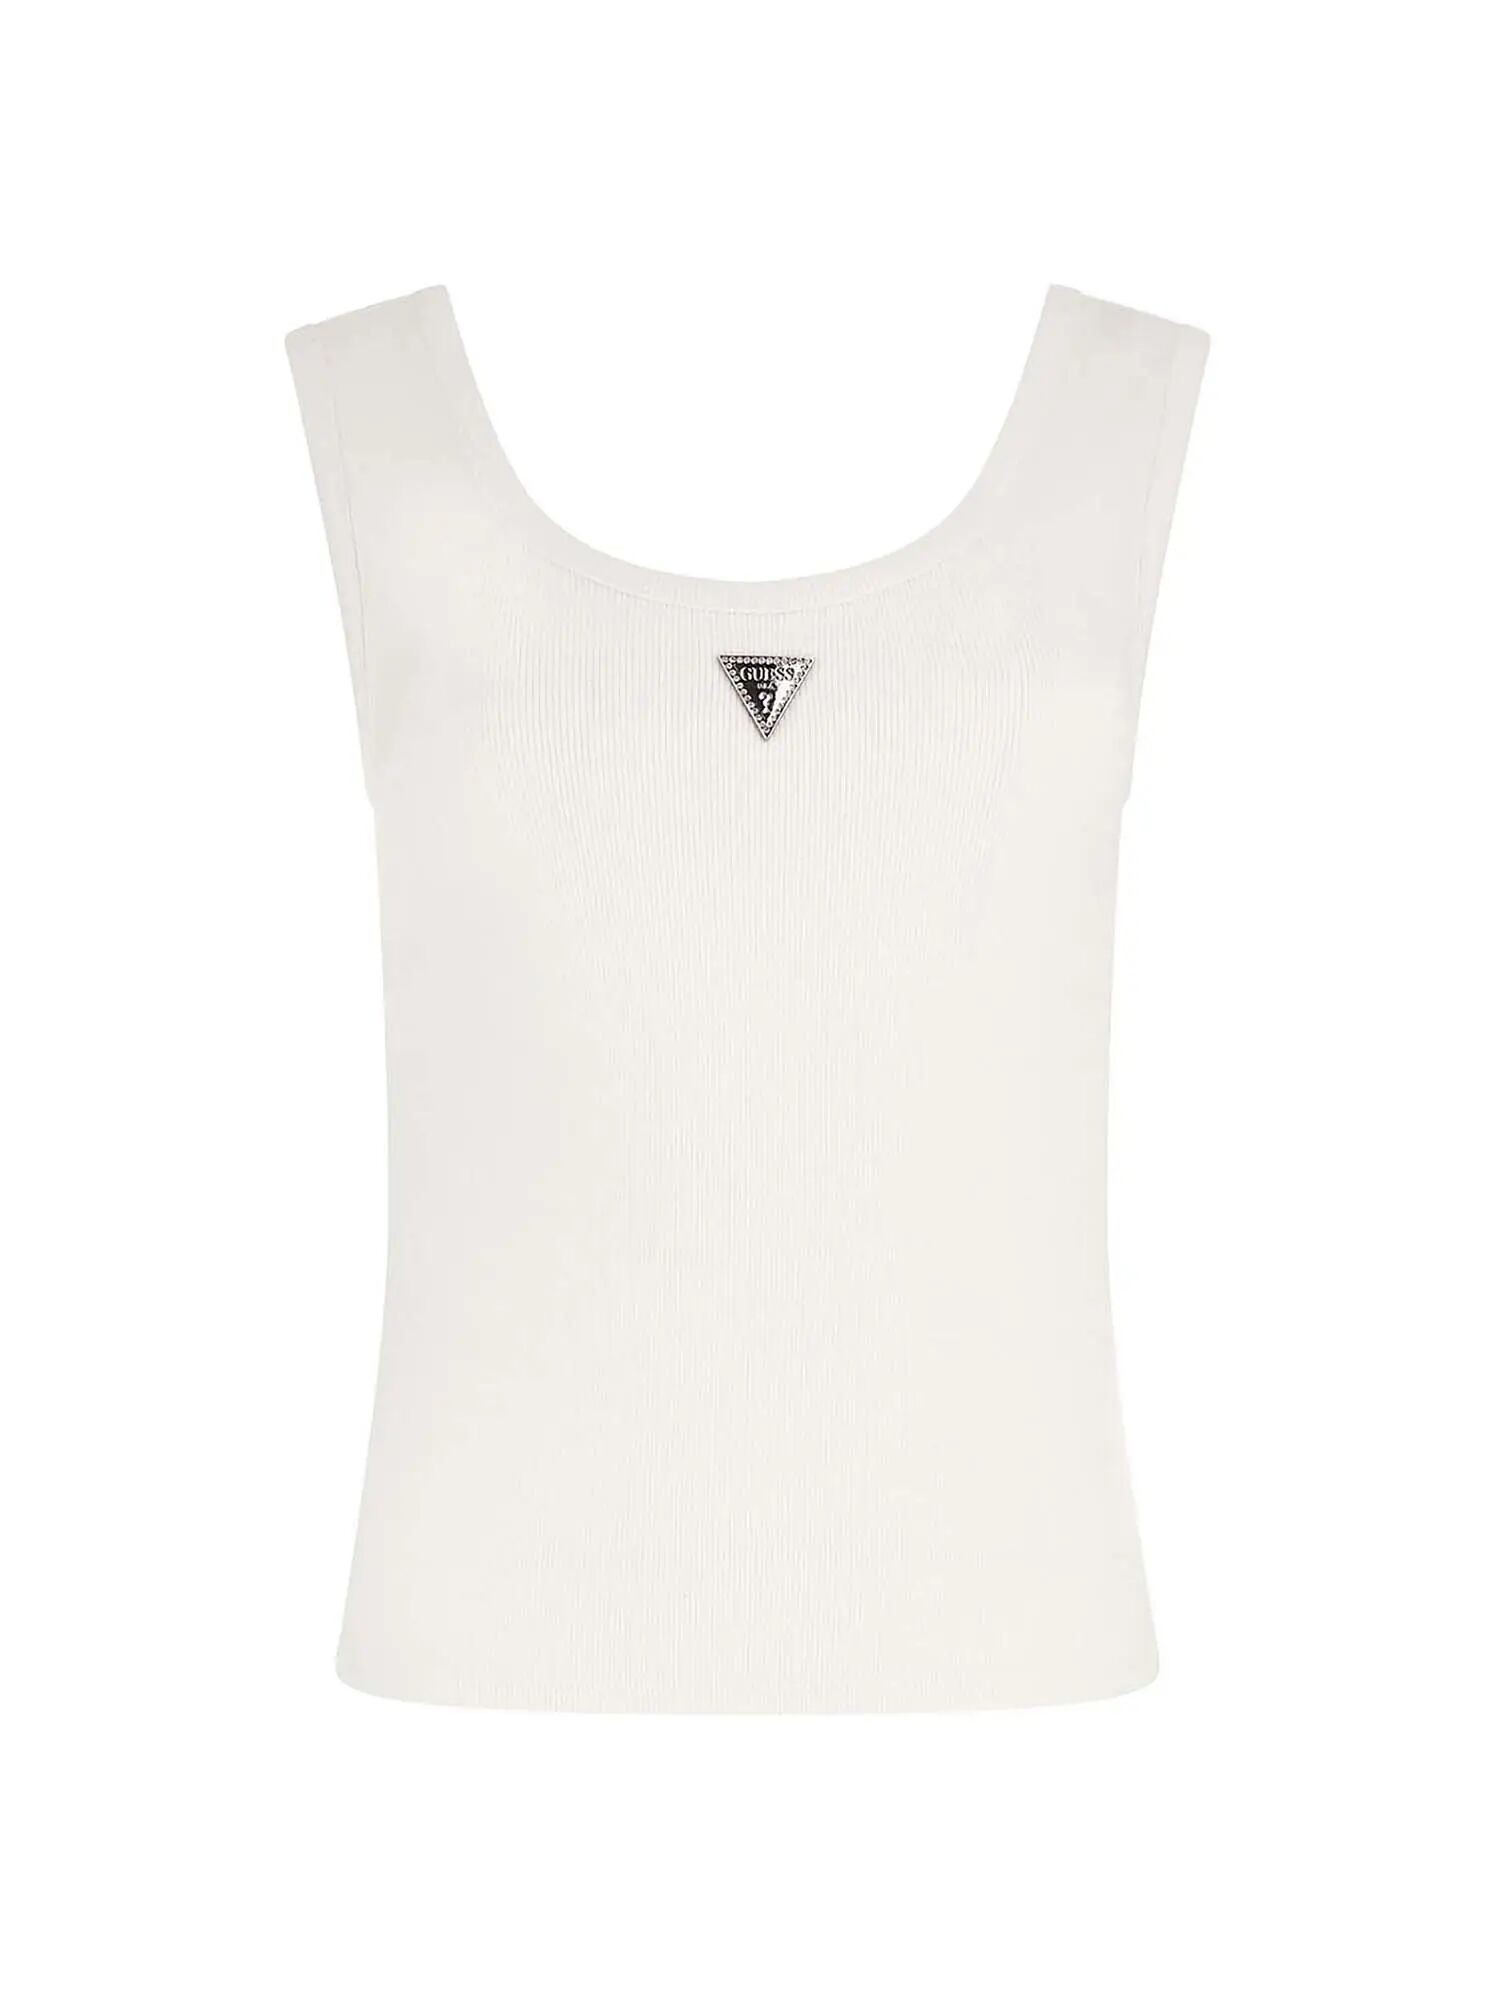 Guess Top Donna Colore Bianco BIANCO S